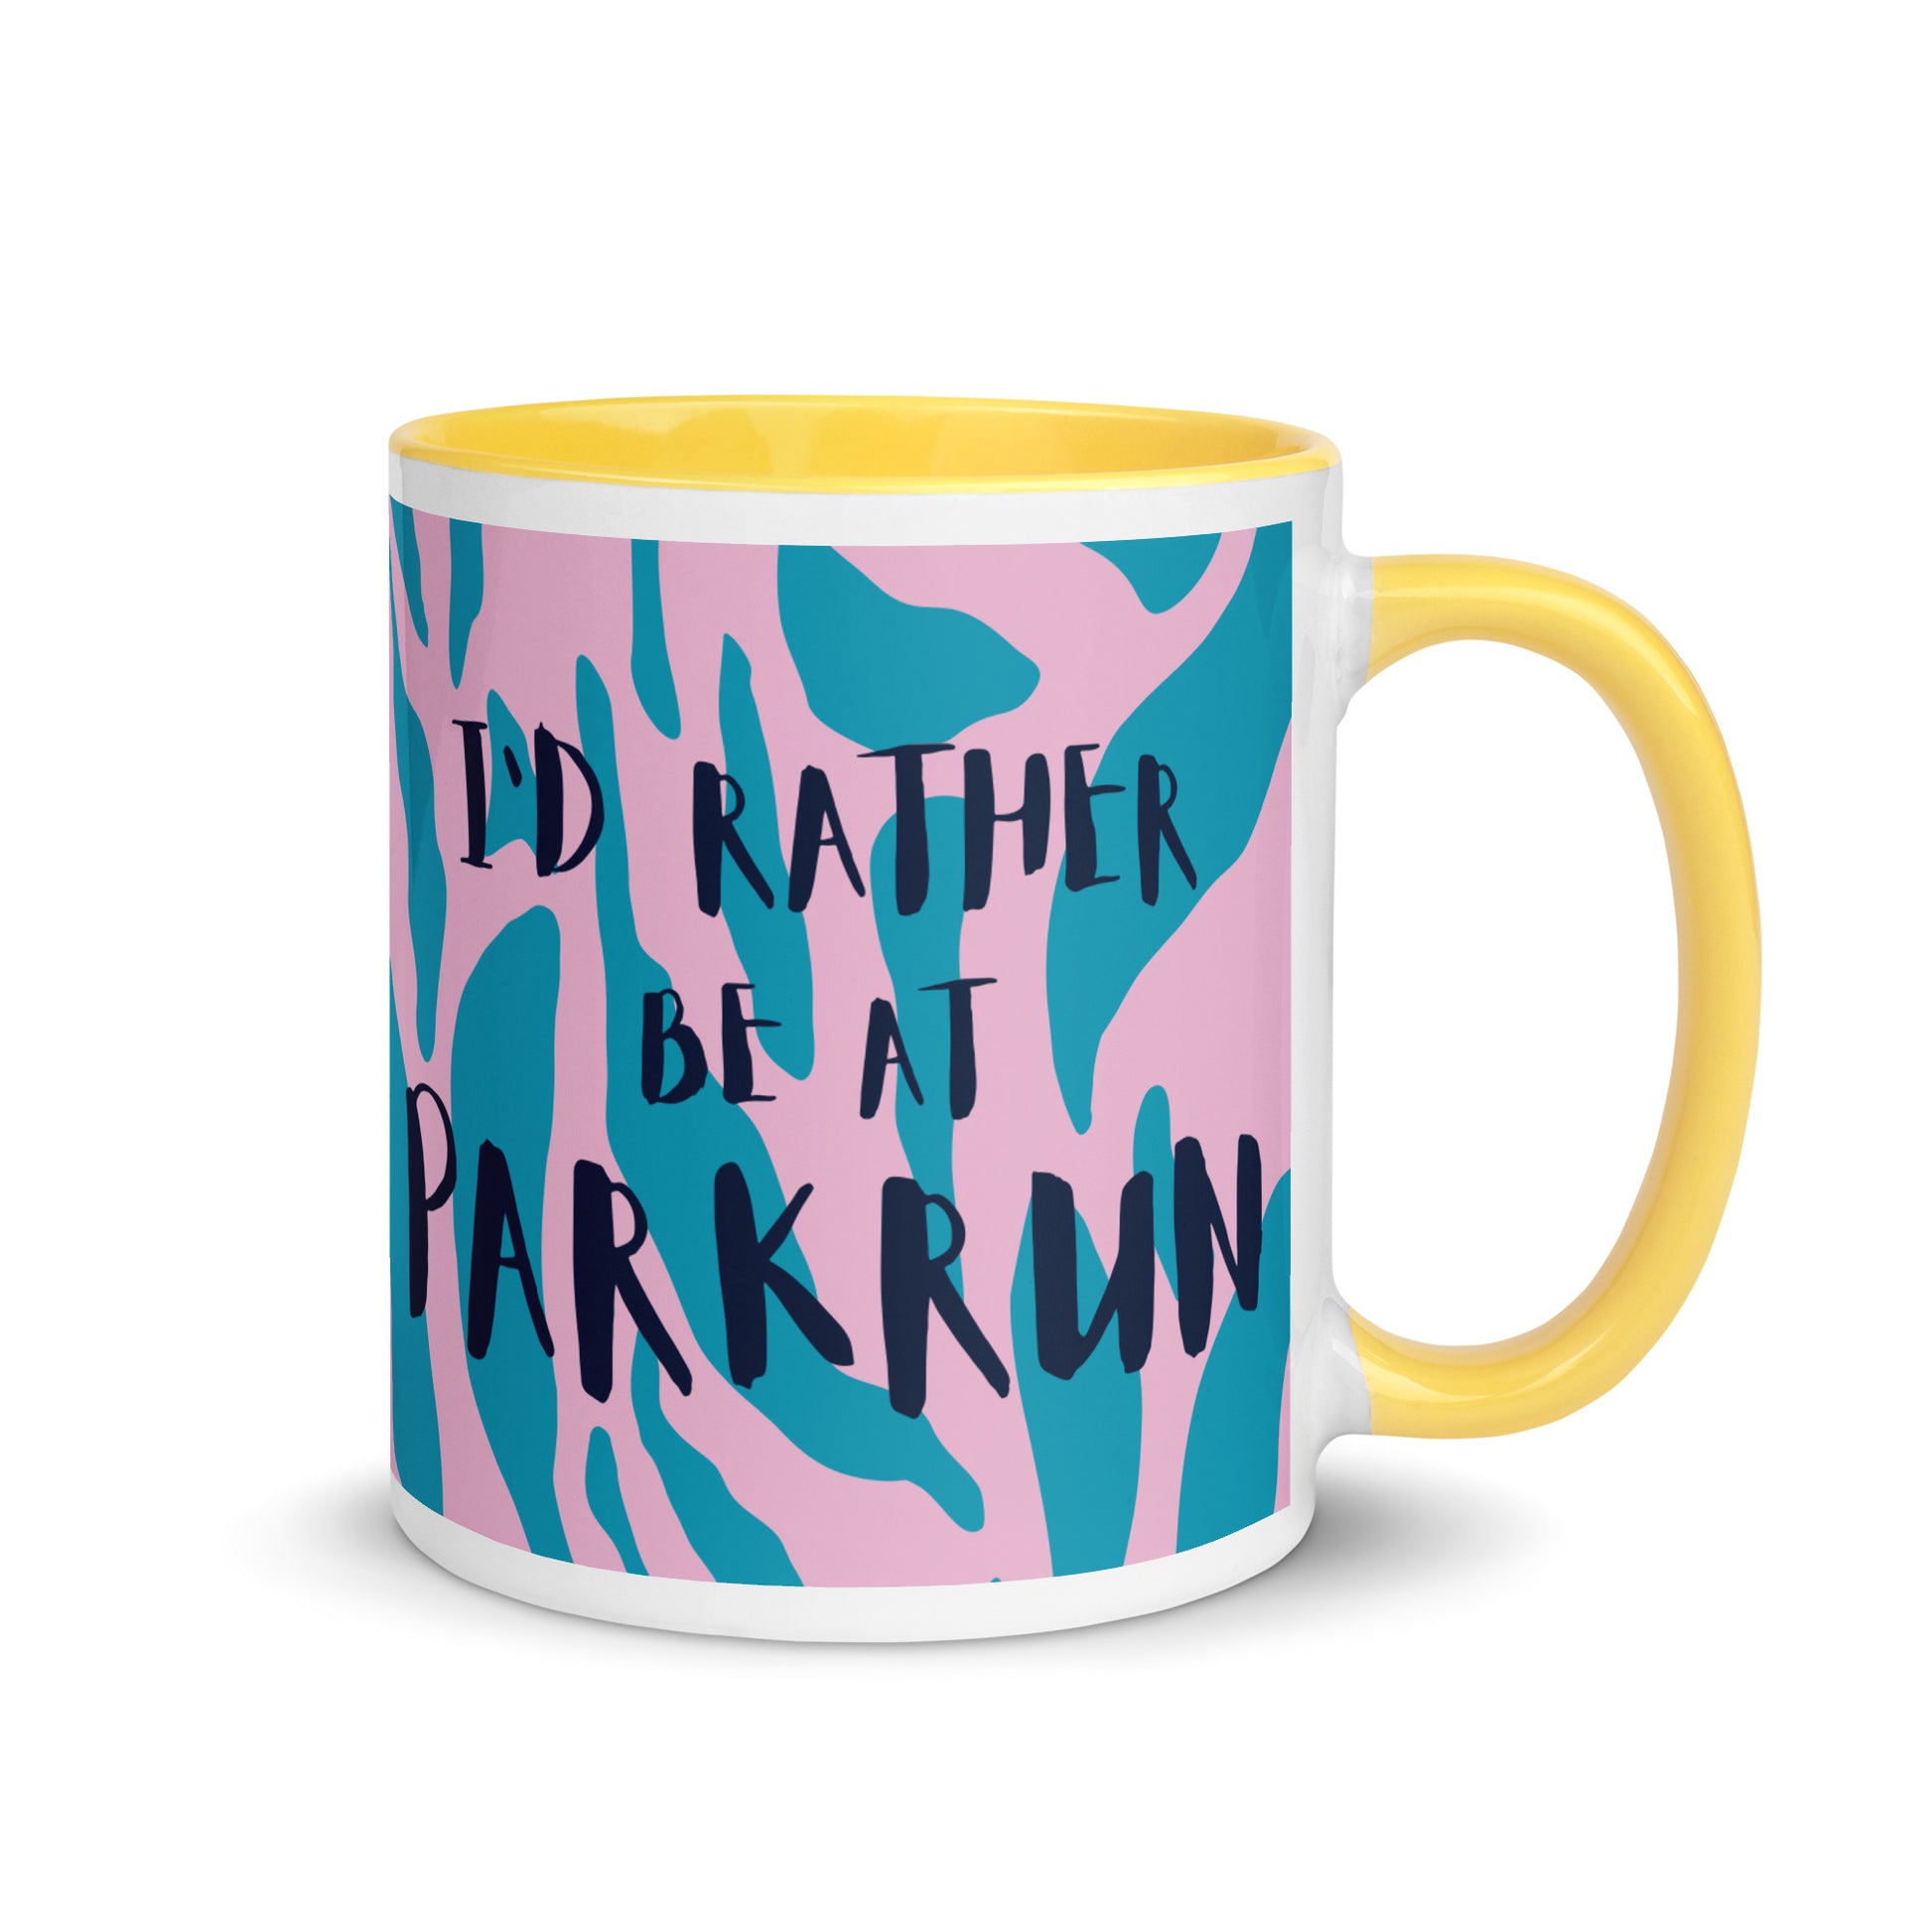 yellow handled mug with a pink and blue animal print design and the phrase I'd rather be at parkrun in a black font. the perfect gift for a runner